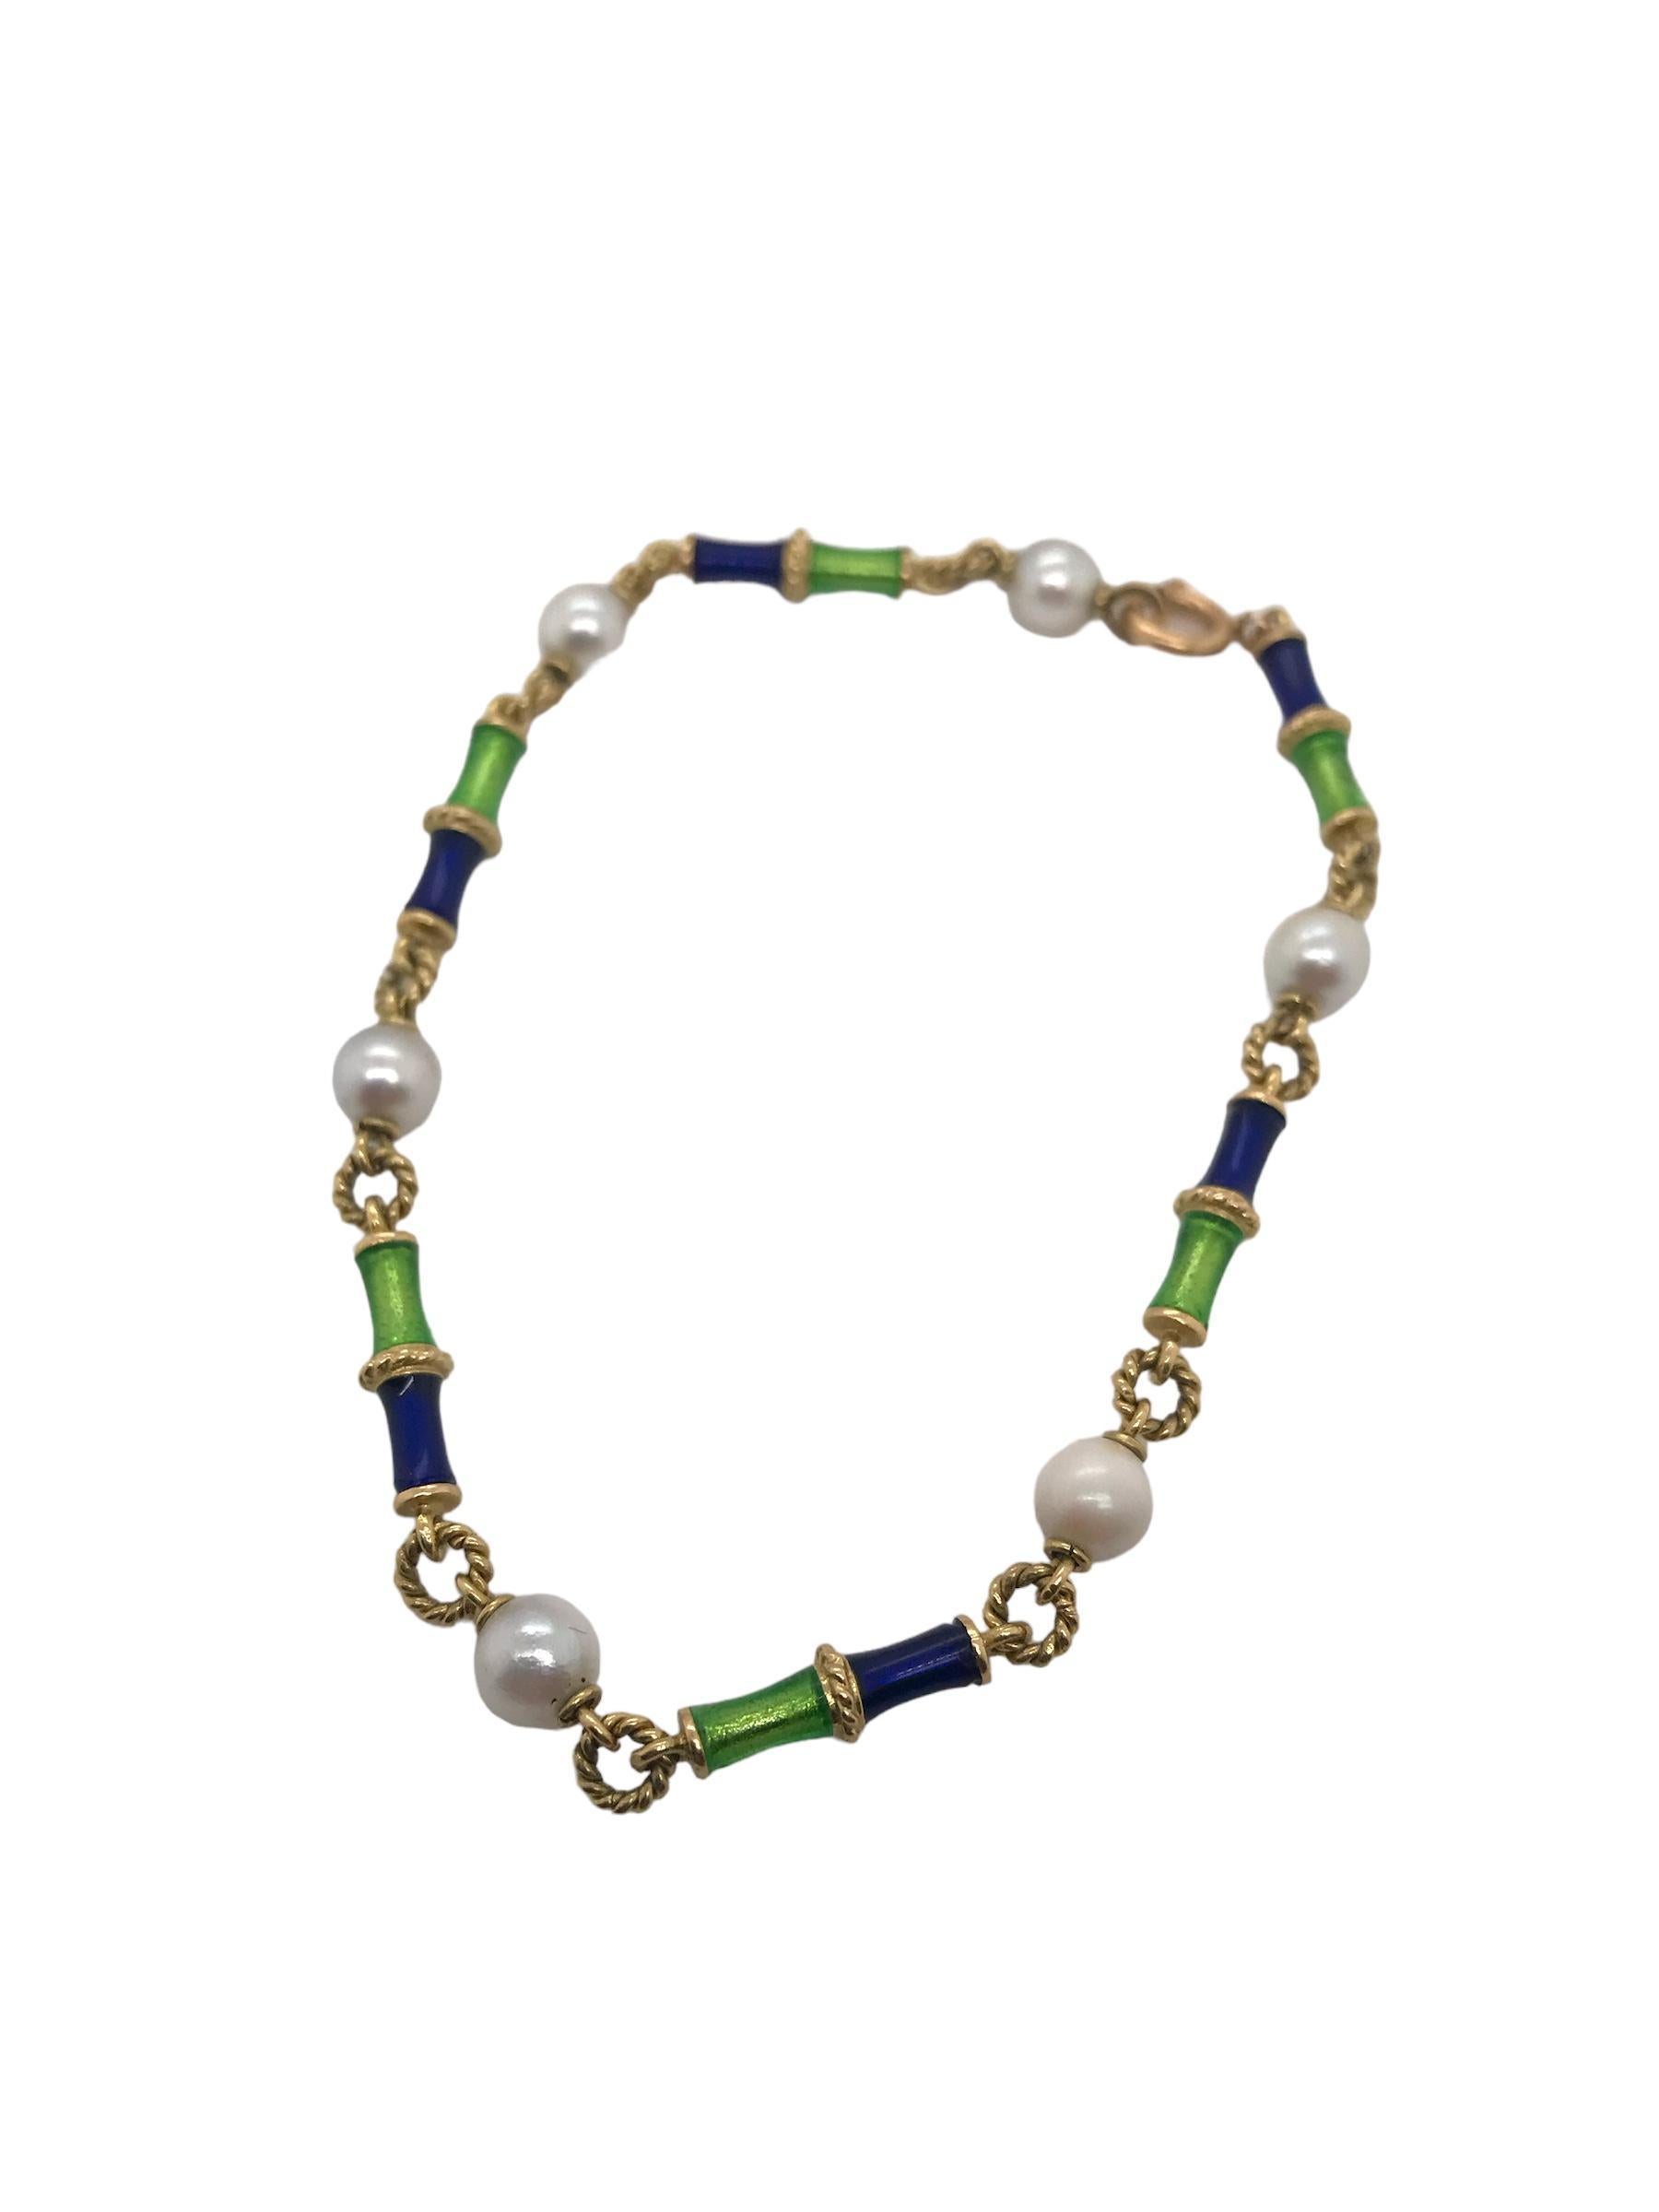 Such a stunning take on a pearl bracelet!
We love the blue & green enameling.

Bracelet Details
Material: 18K Yellow Gold
Weight: 8.2 Grams
Length: 7 1/2 Inches
6 - 5.3mm Round Cultured Pearls; White Color; High Luster

Item: V71KM2-8